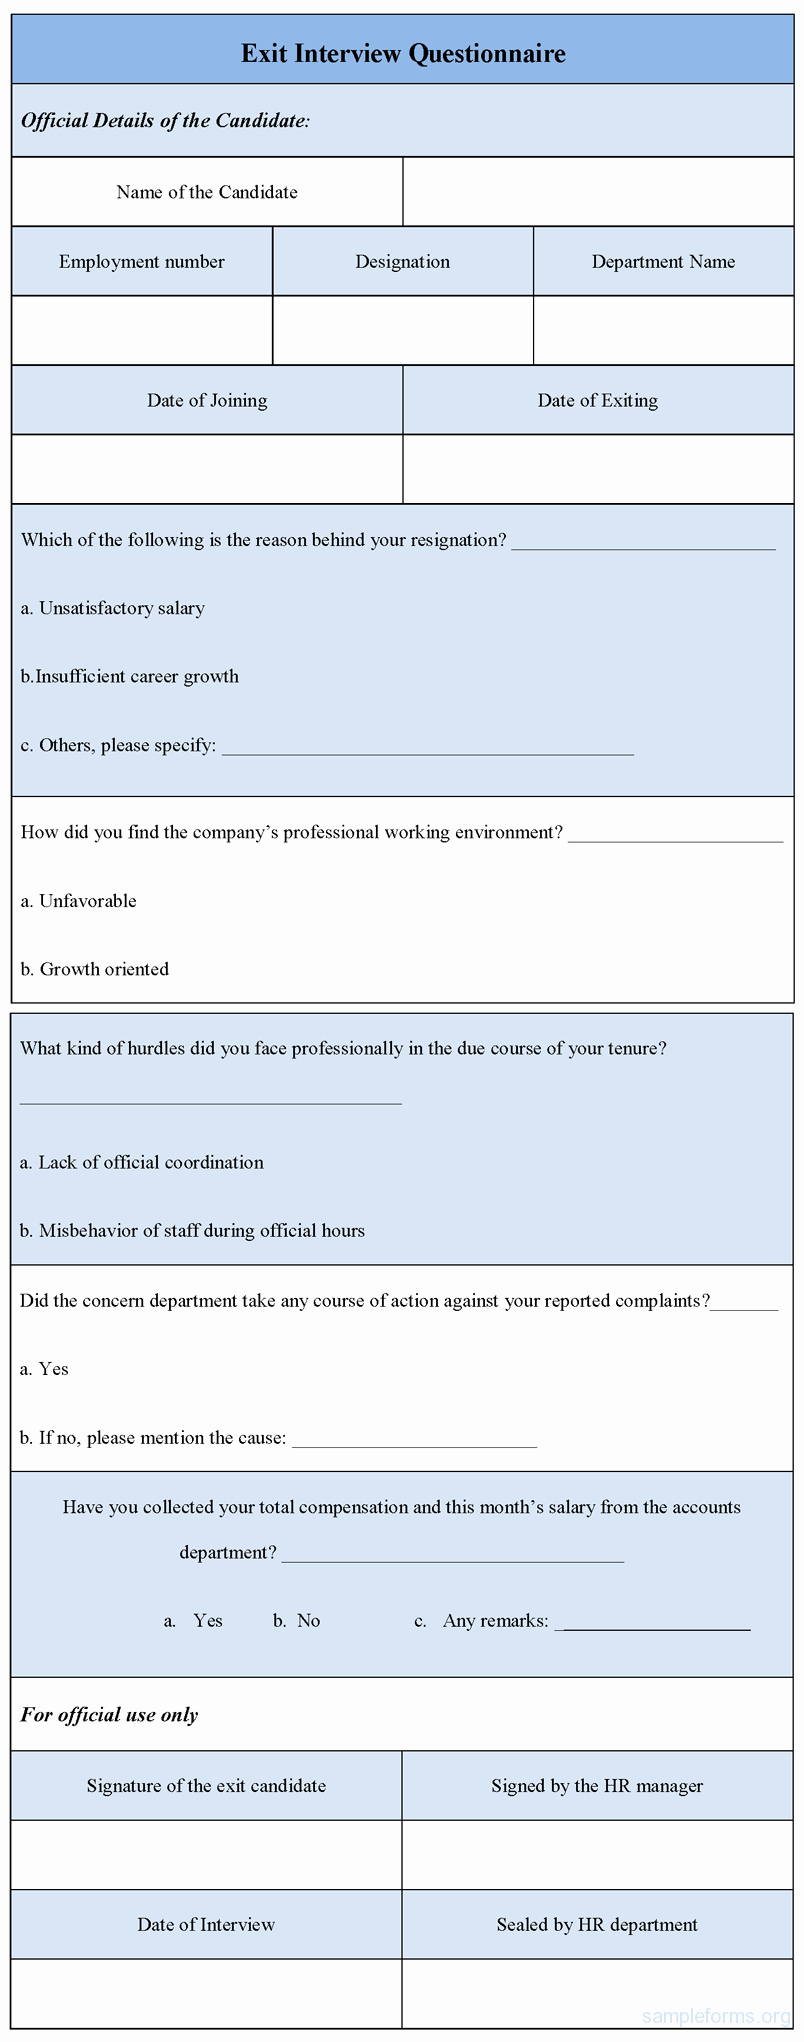 Sample Exit Interview forms Beautiful Exit Interview Questionnaire form Sample forms